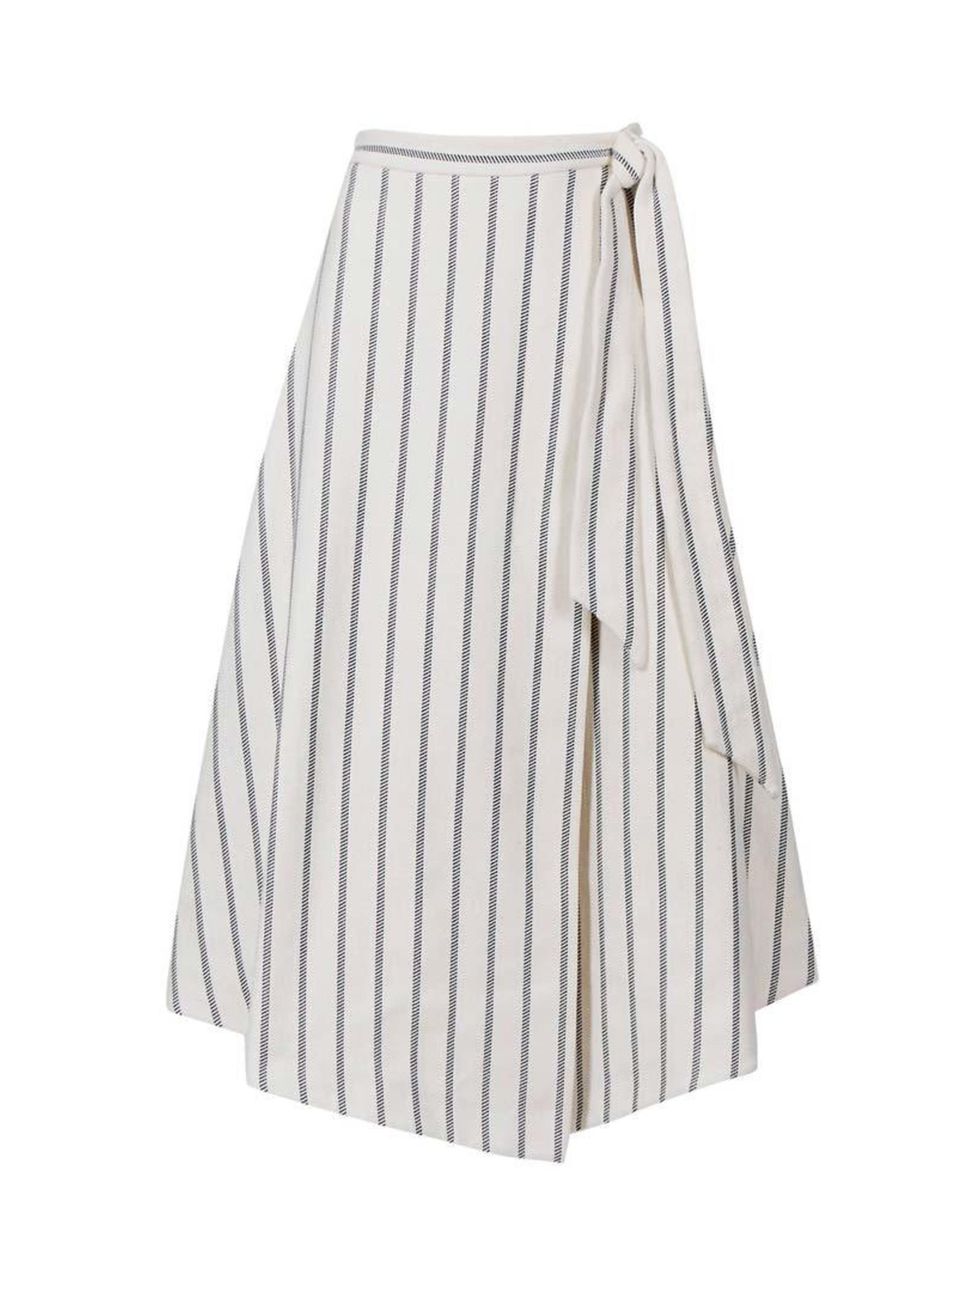 <p>Freelance Fashion Assistant Felicity Kay will pair this wrap skirt with a white shirt and ankle boots.</p>

<p><a href="http://www.marksandspencer.com/cotton-rich-striped-a-line-skirt/p/p22387010#" target="_blank">Marks & Spencer</a> skirt, £55</p>